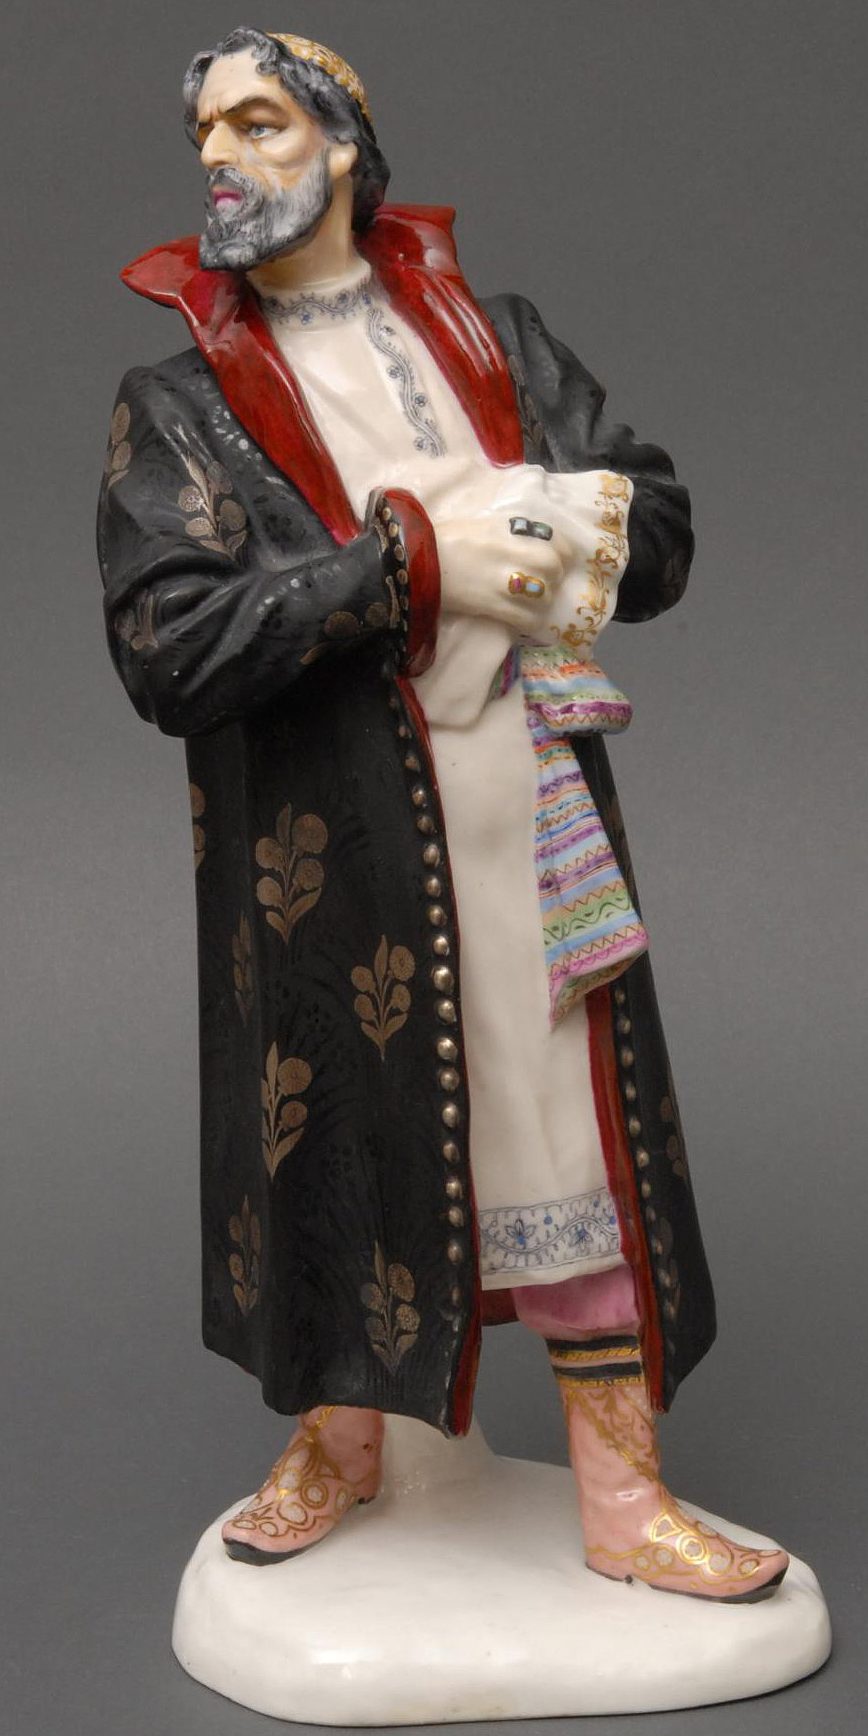 Soviet porcelain figure of Shaliapin in the role of Boris Godunov by Troupiansky